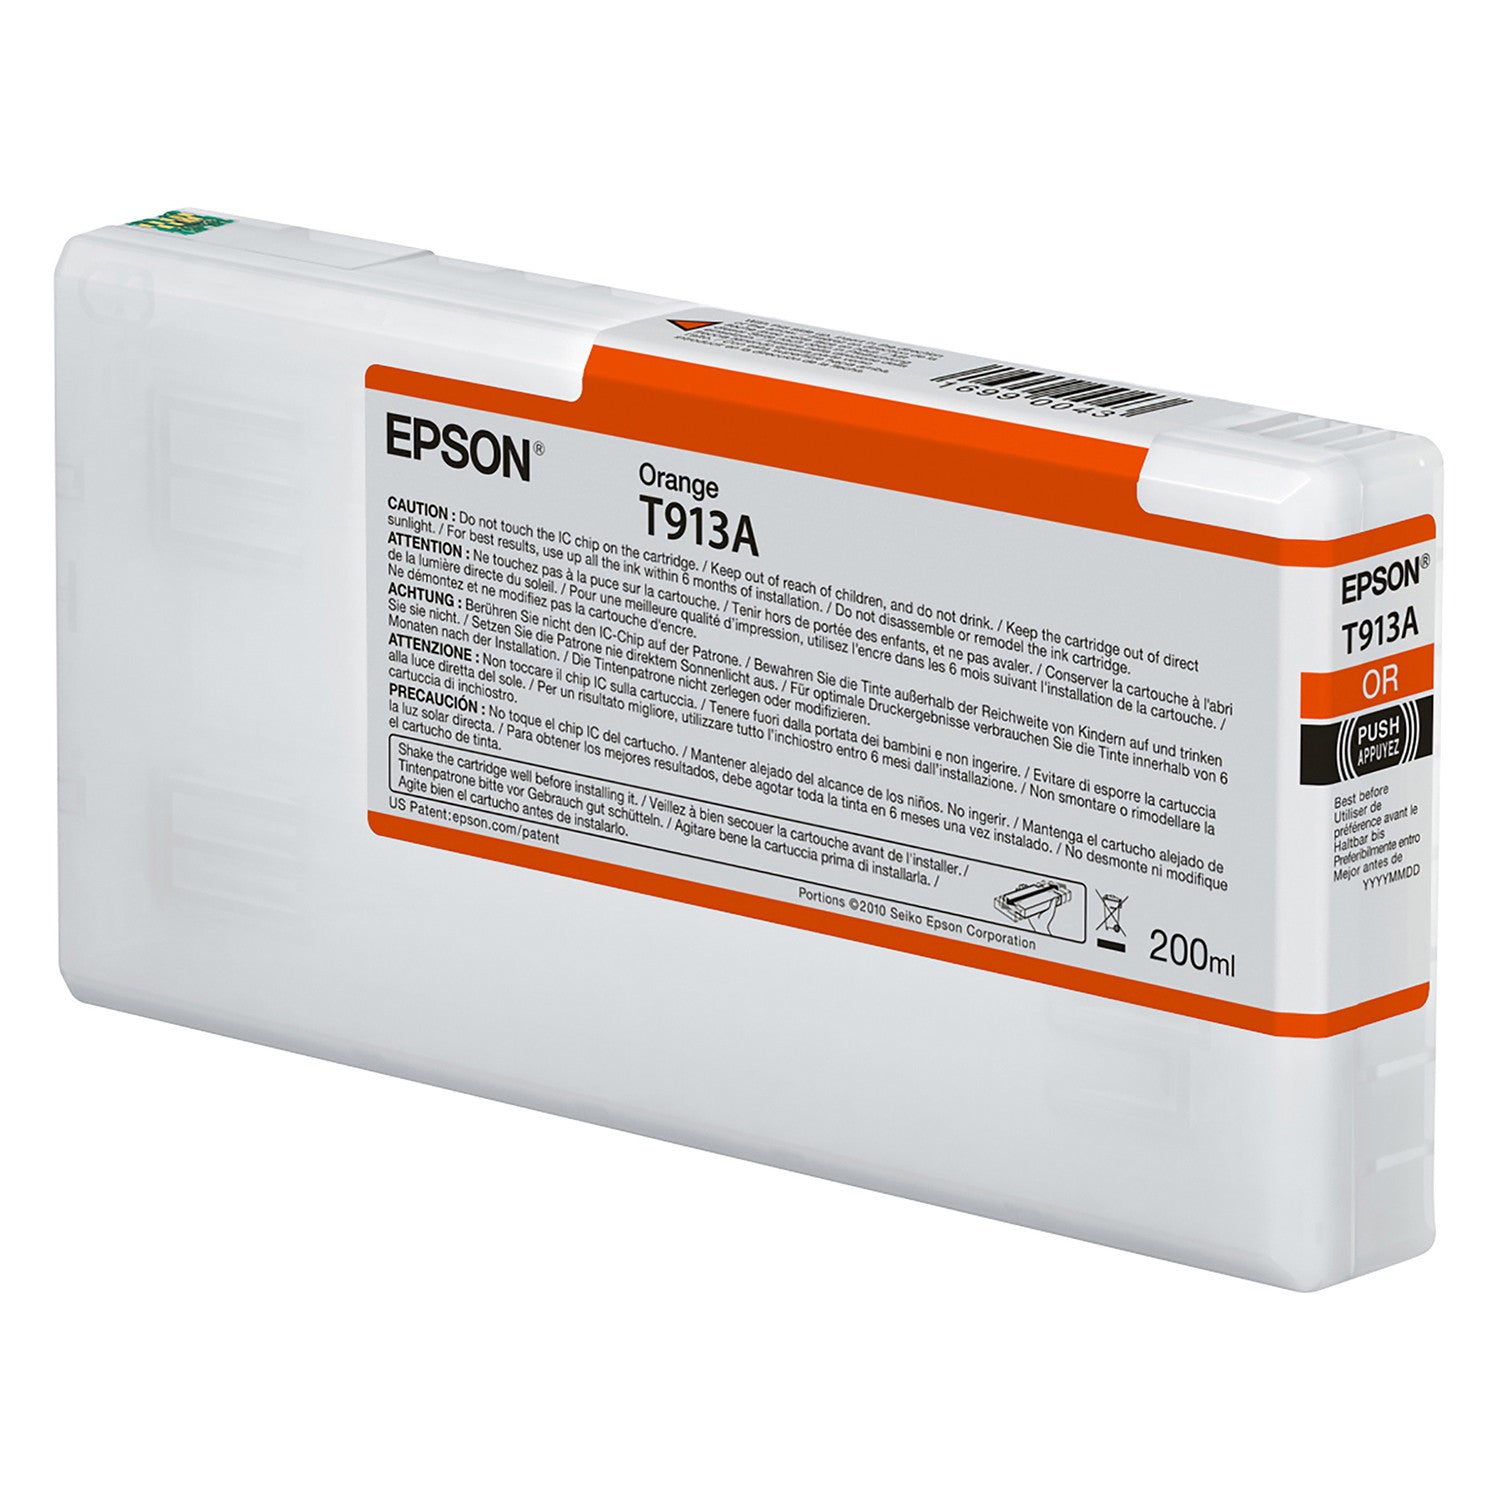 Epson T913A00 P5000 Ultrachrome HD Ink 200ml Orange, papers printer ink, Epson - Pictureline 